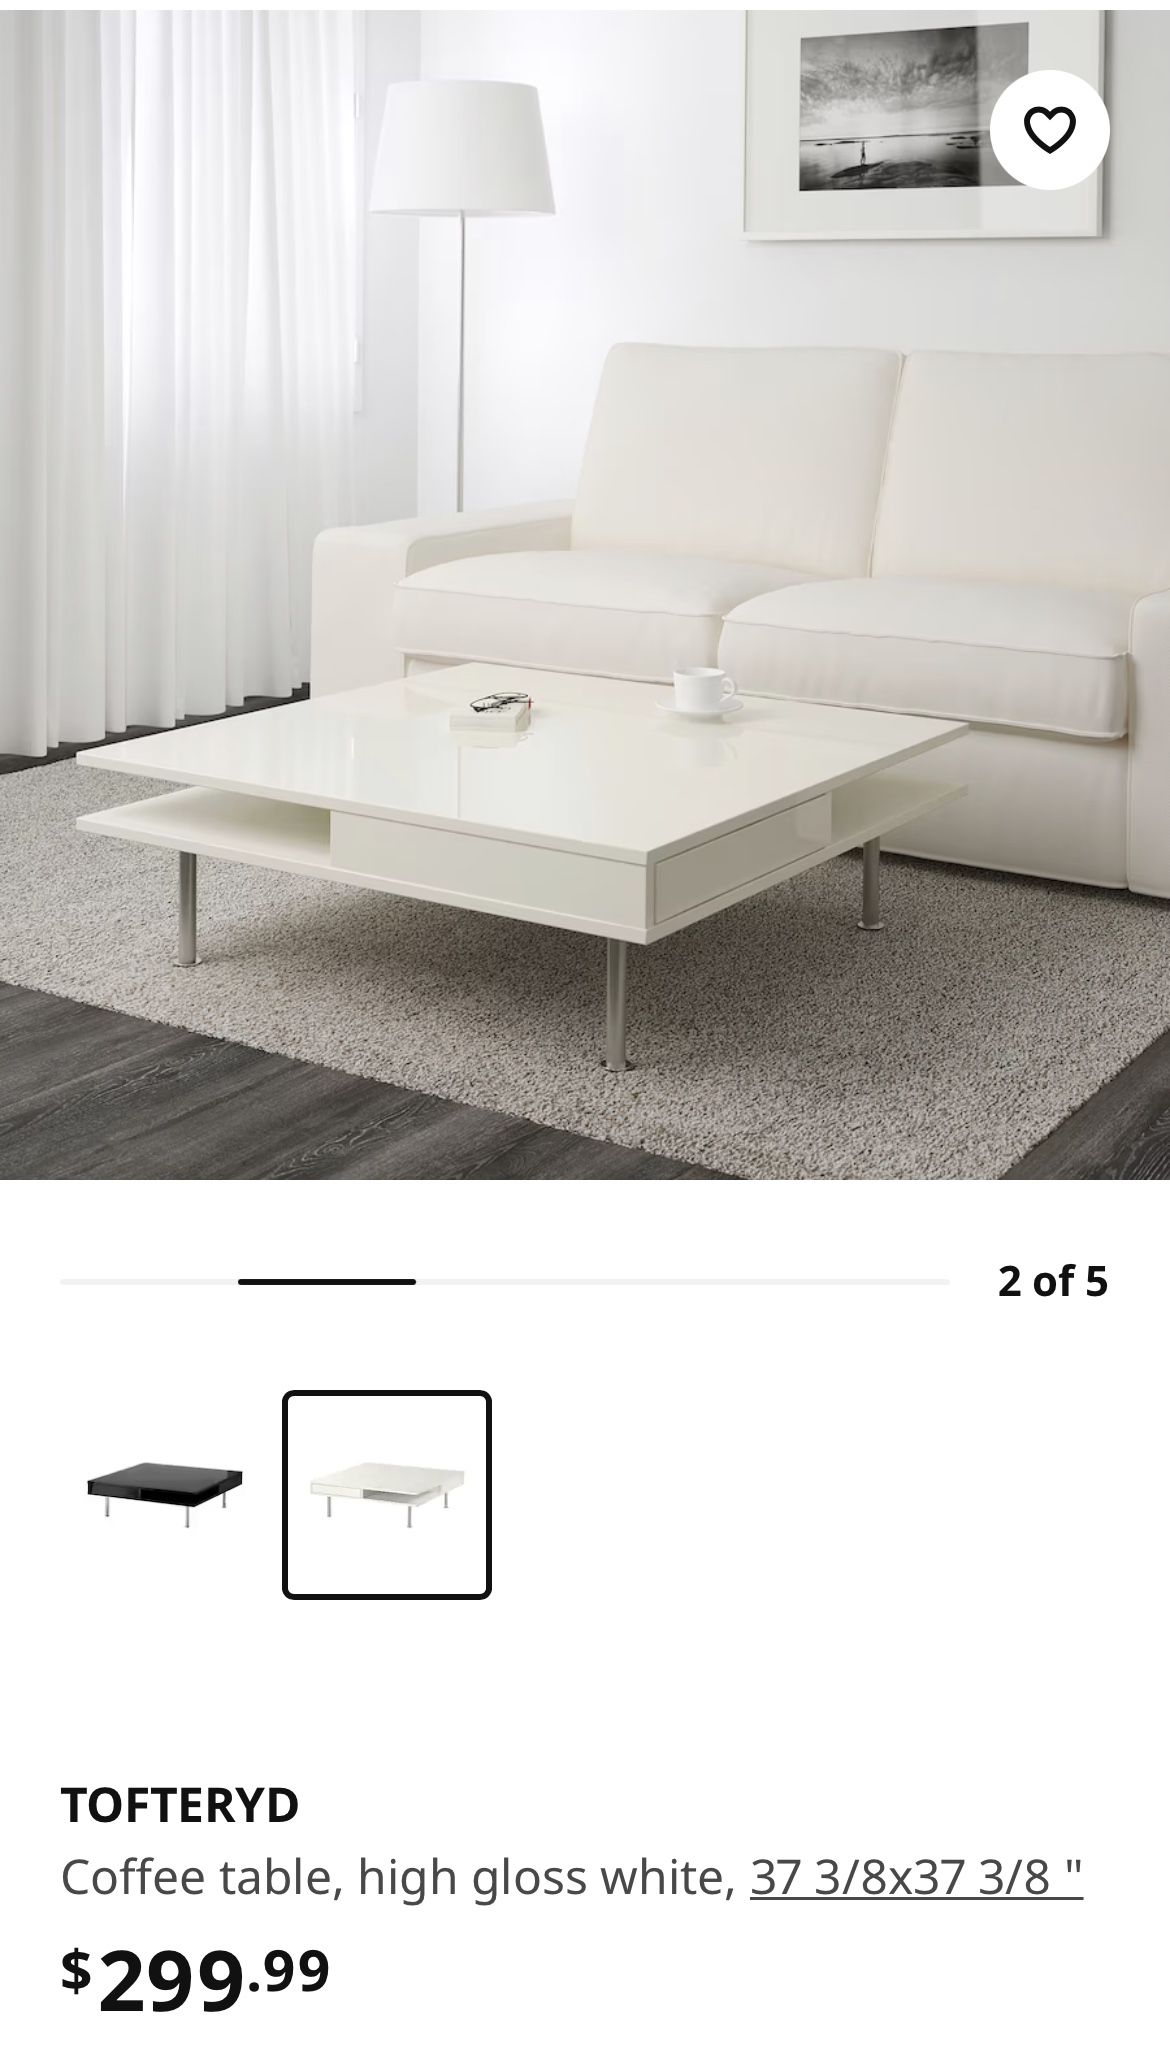 Geld rubber trechter Ik geloof IKEA TOFTERYD Coffee table, high gloss white, for Sale in New York, NY -  OfferUp